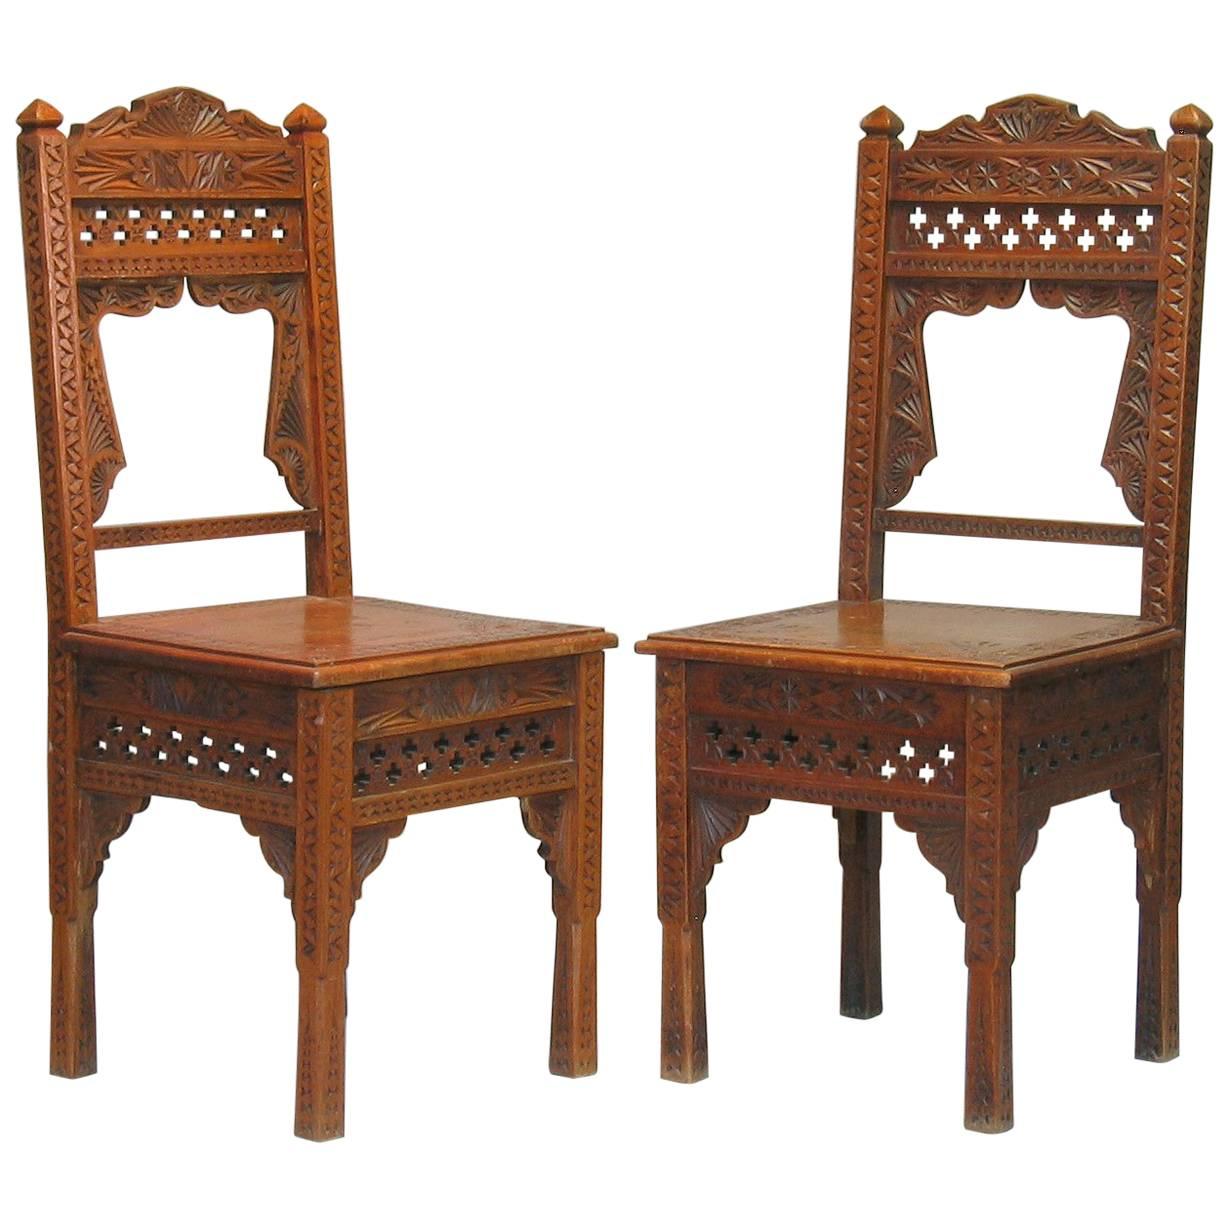 Pair of Middle Eastern Carved Hardwood Side Chairs